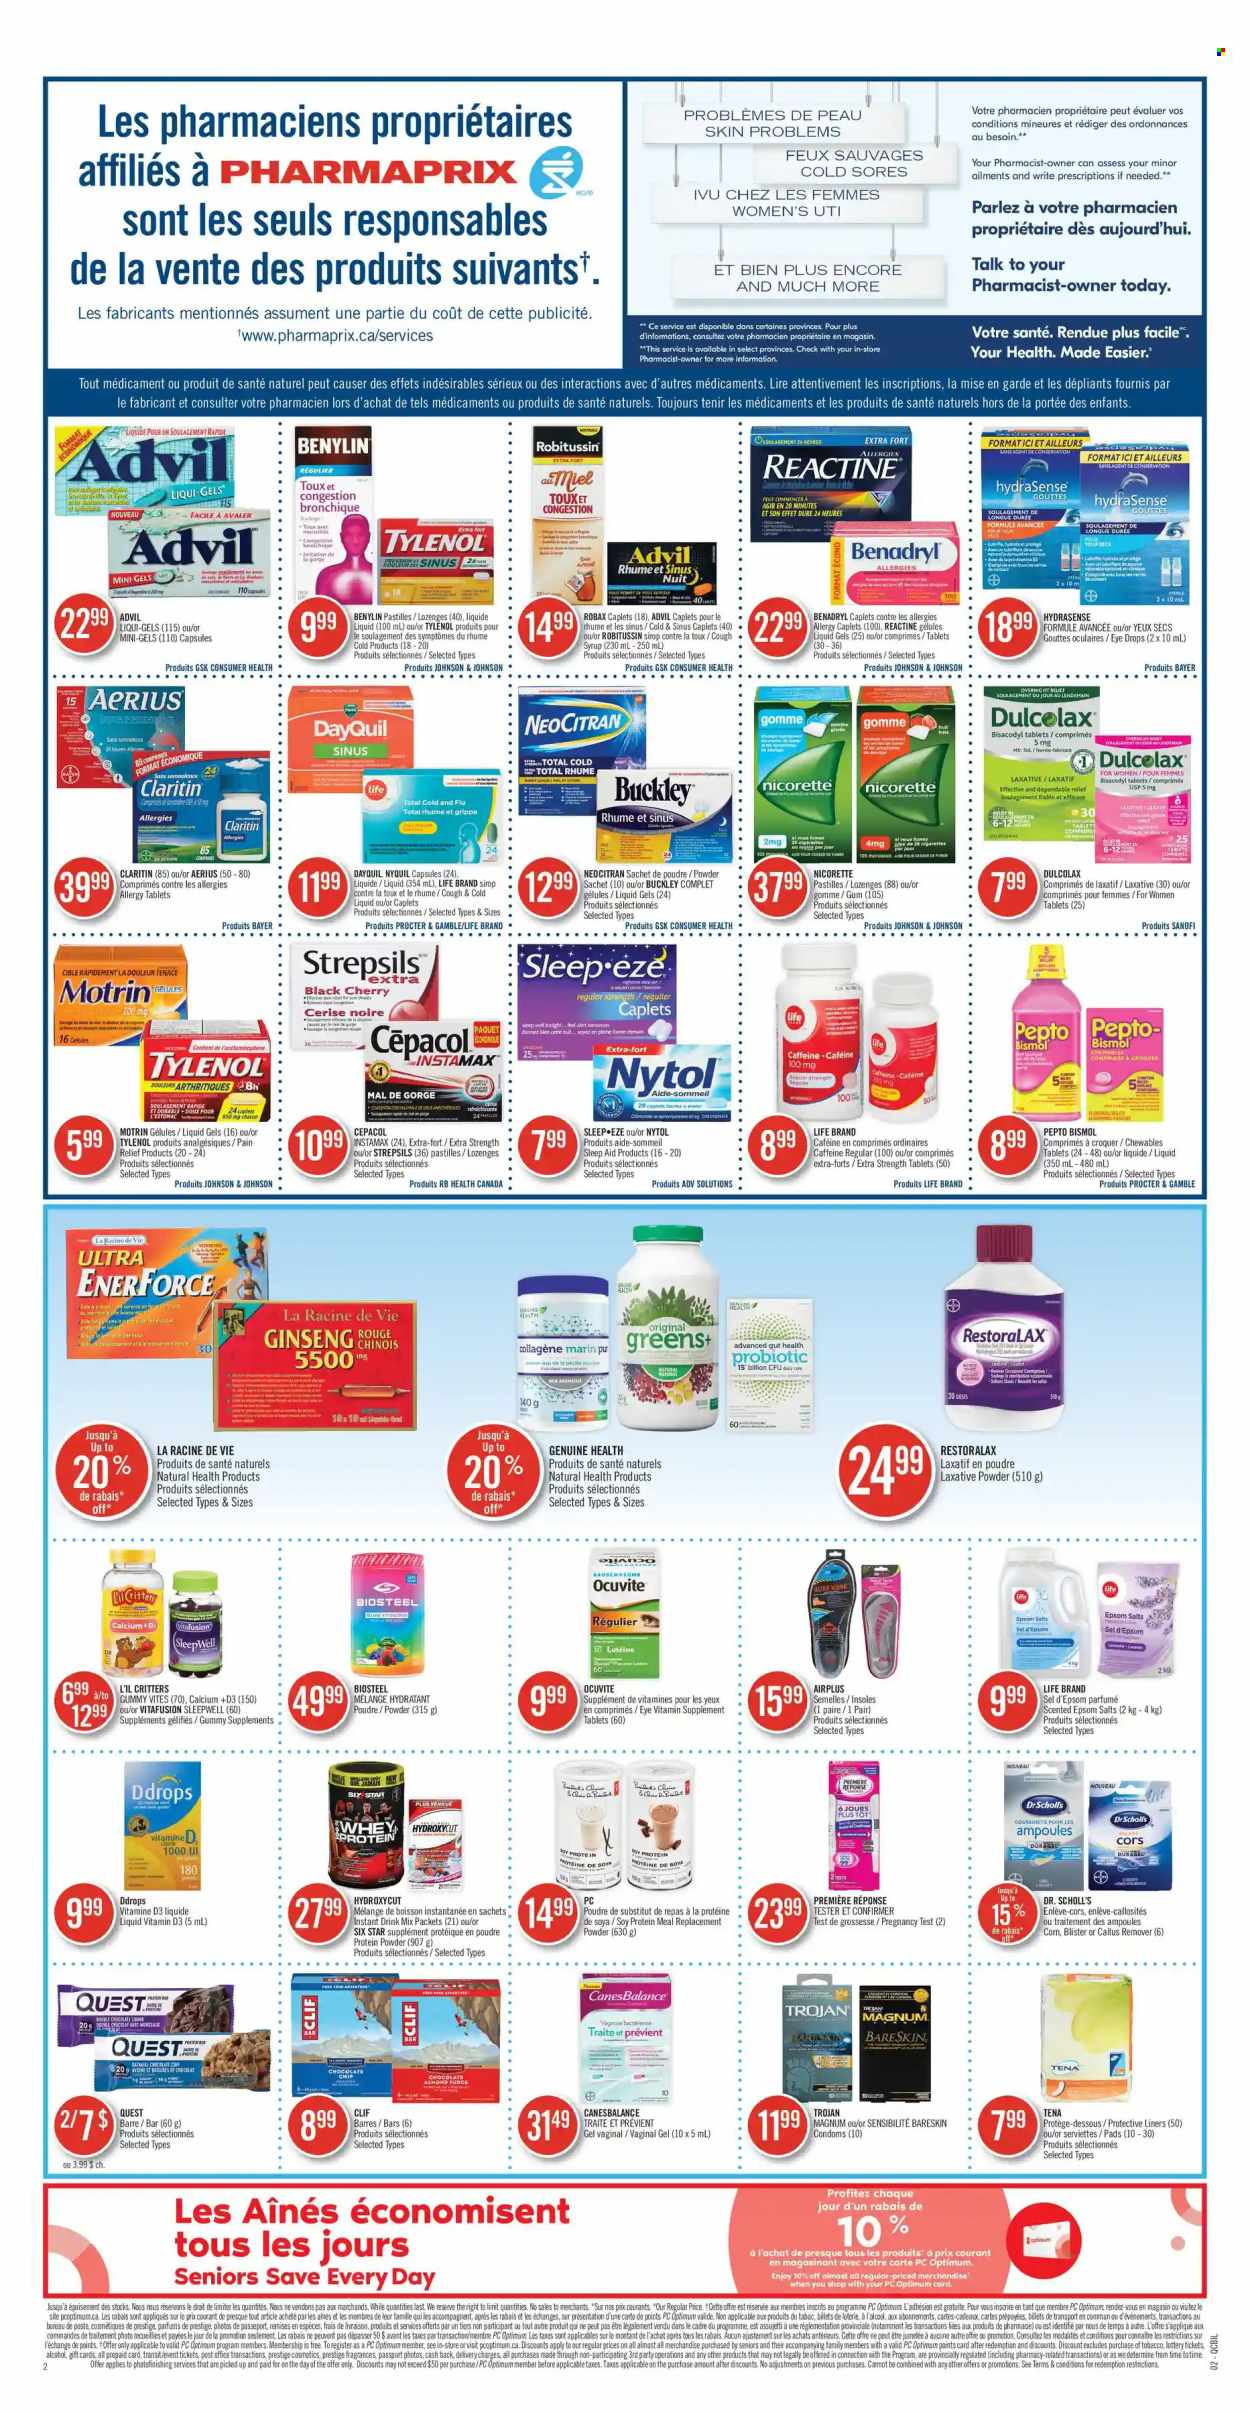 thumbnail - Pharmaprix Flyer - October 02, 2021 - October 08, 2021 - Sales products - corn, cherries, Magnum, chocolate, pastilles, syrup, alcohol, Johnson's, callus remover, toys, pain relief, DayQuil, Dulcolax, Nicorette, Tylenol, Vitafusion, NyQuil, ginseng, eye drops, Advil Rapid, whey protein, Strepsils, laxative, vitamin D3, Bayer, Benylin, Motrin, Dr. Scholl's, calcium, Robitussin, Ocuvite. Page 2.